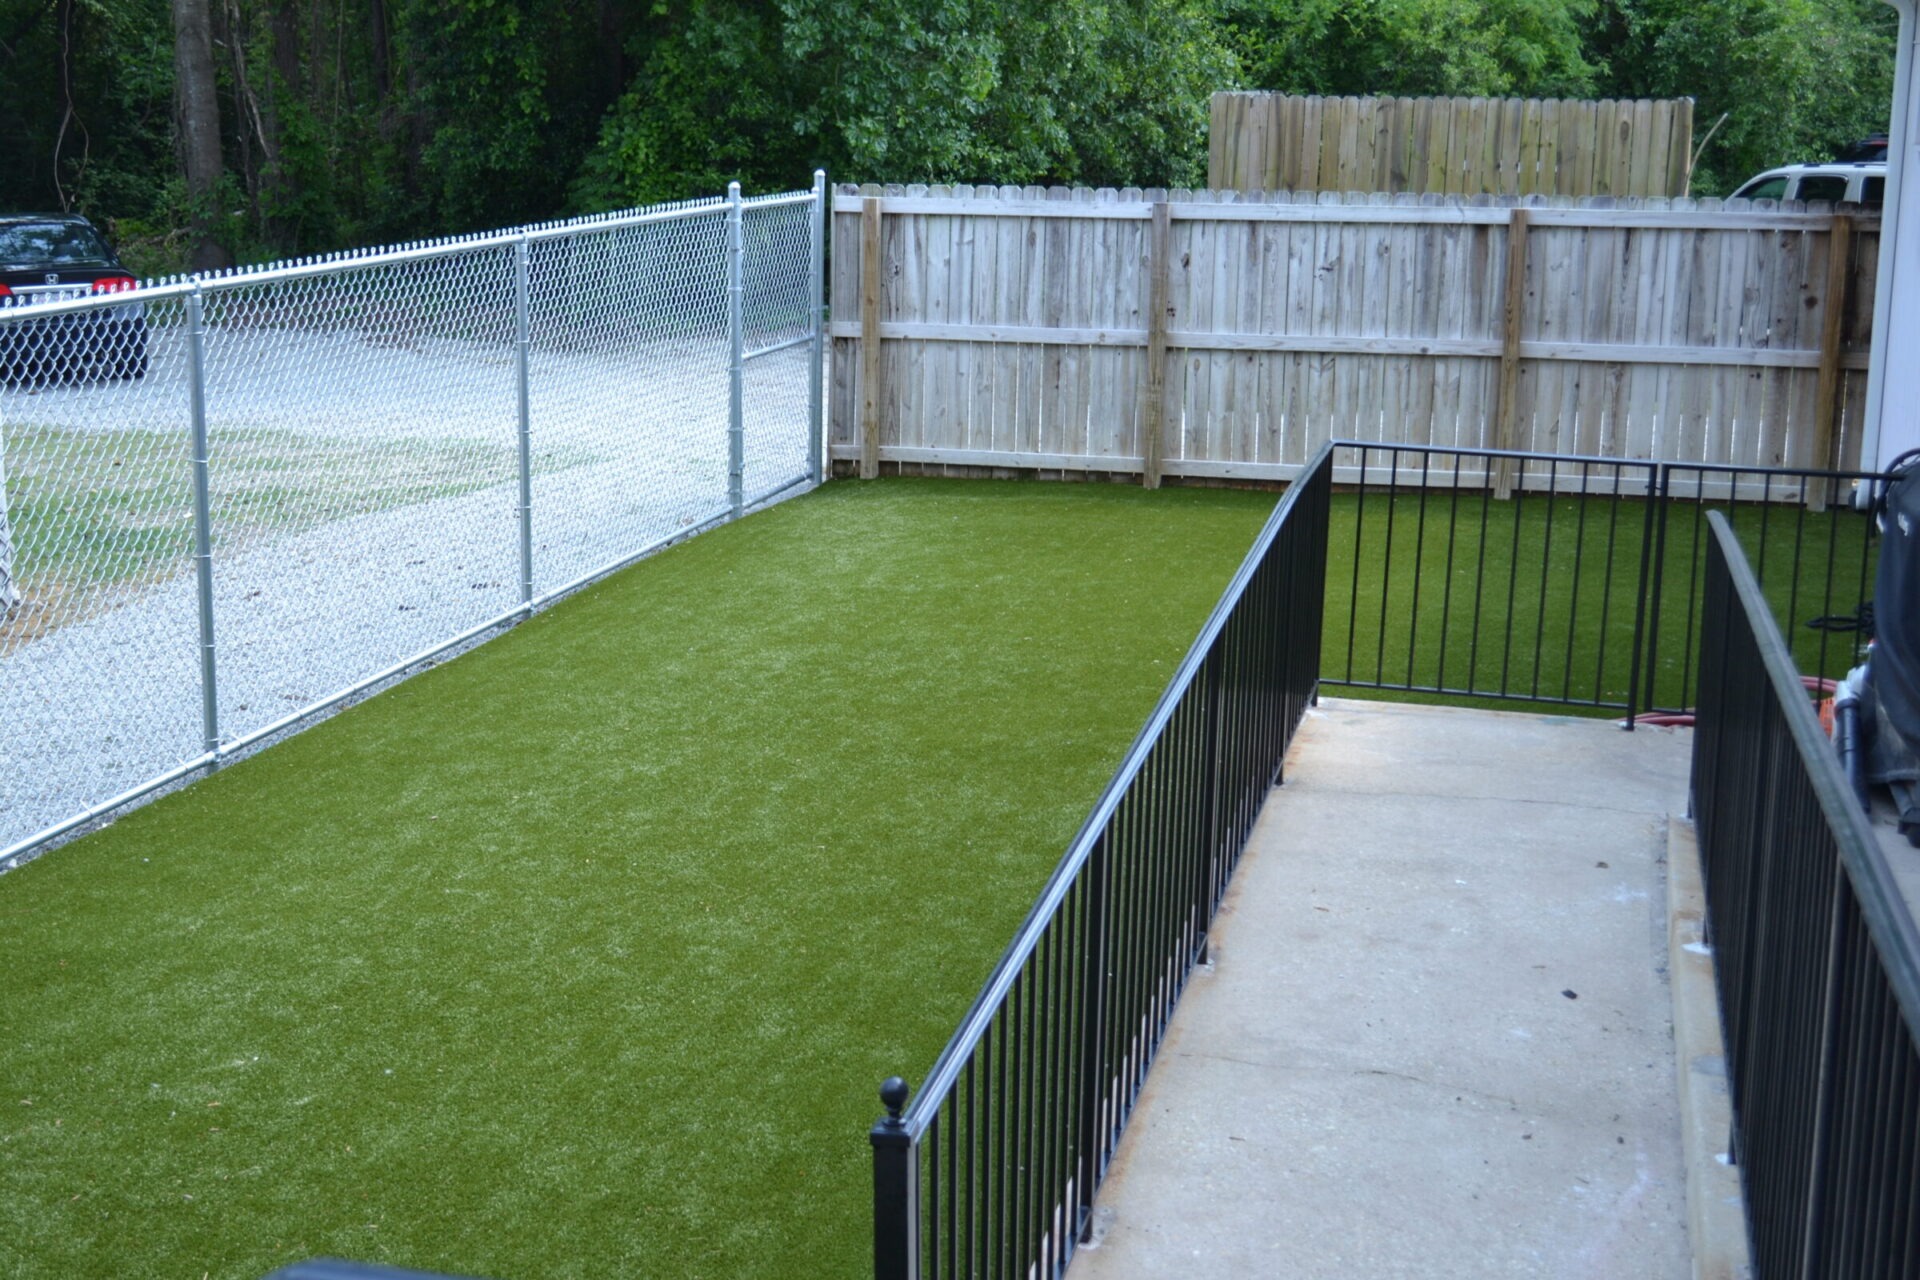 This image shows a fenced backyard with artificial green grass, a concrete path, a chain-link fence, and a wooden privacy fence.